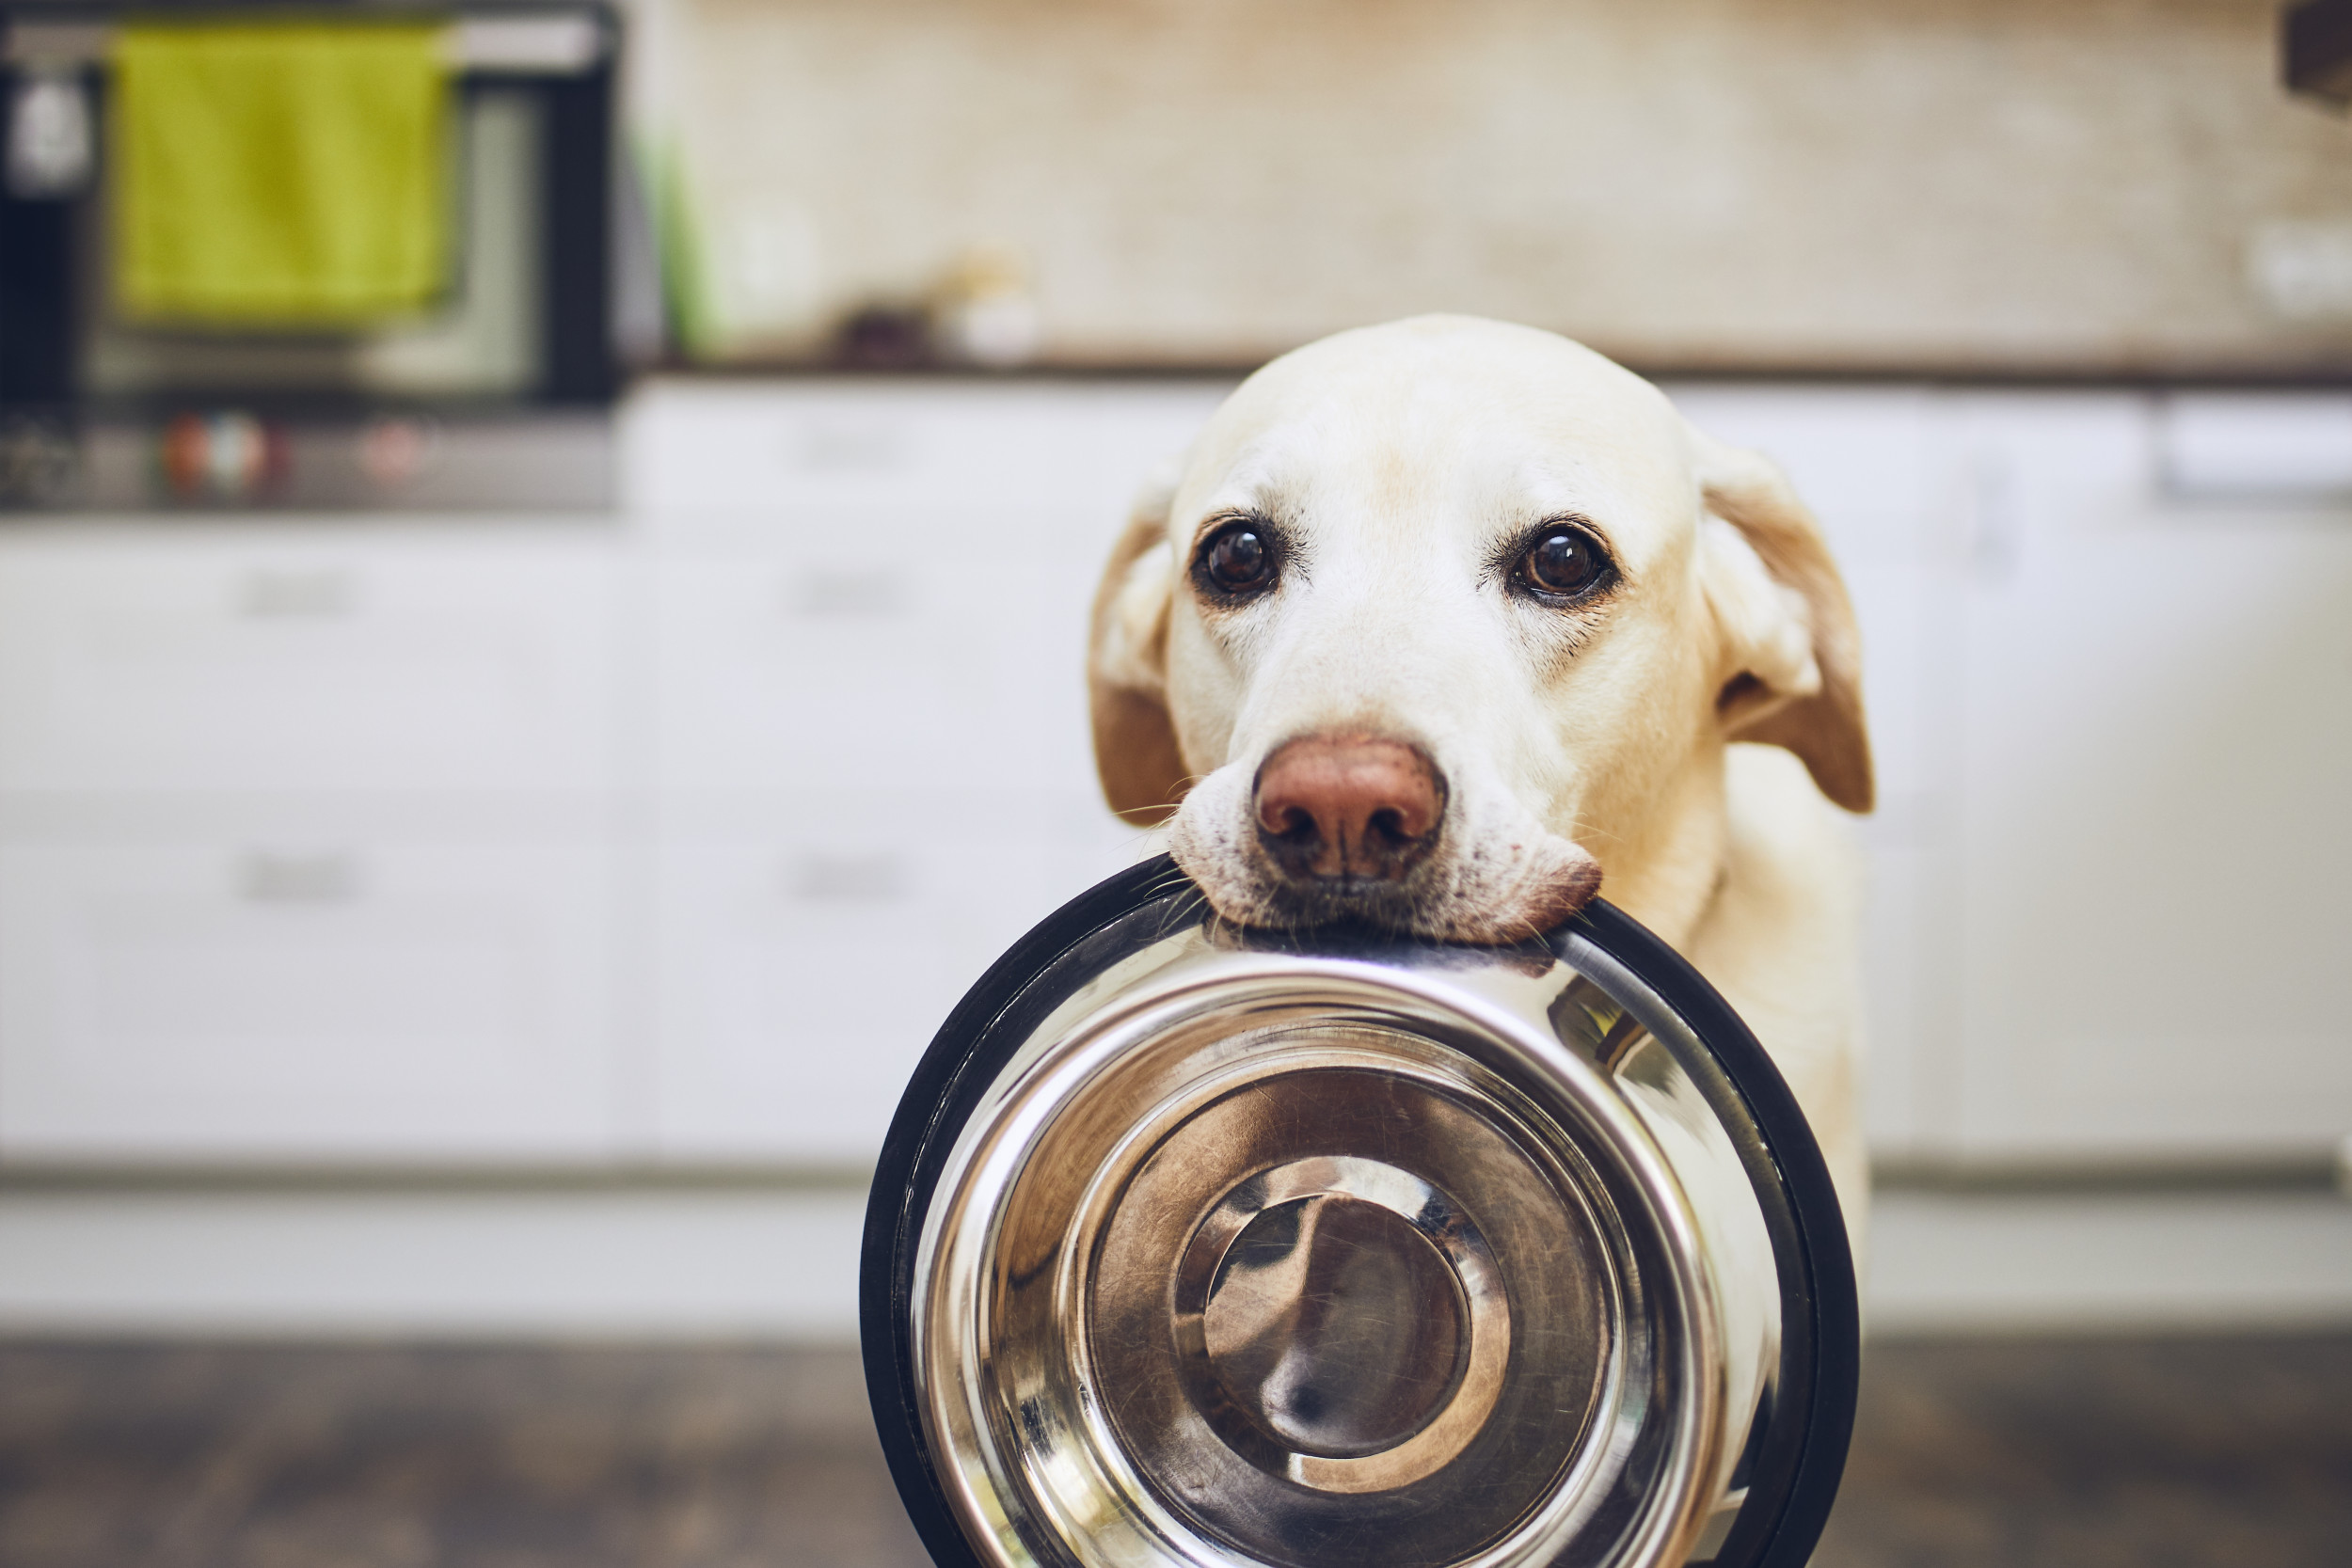 22 people foods you shouldn't give your dog